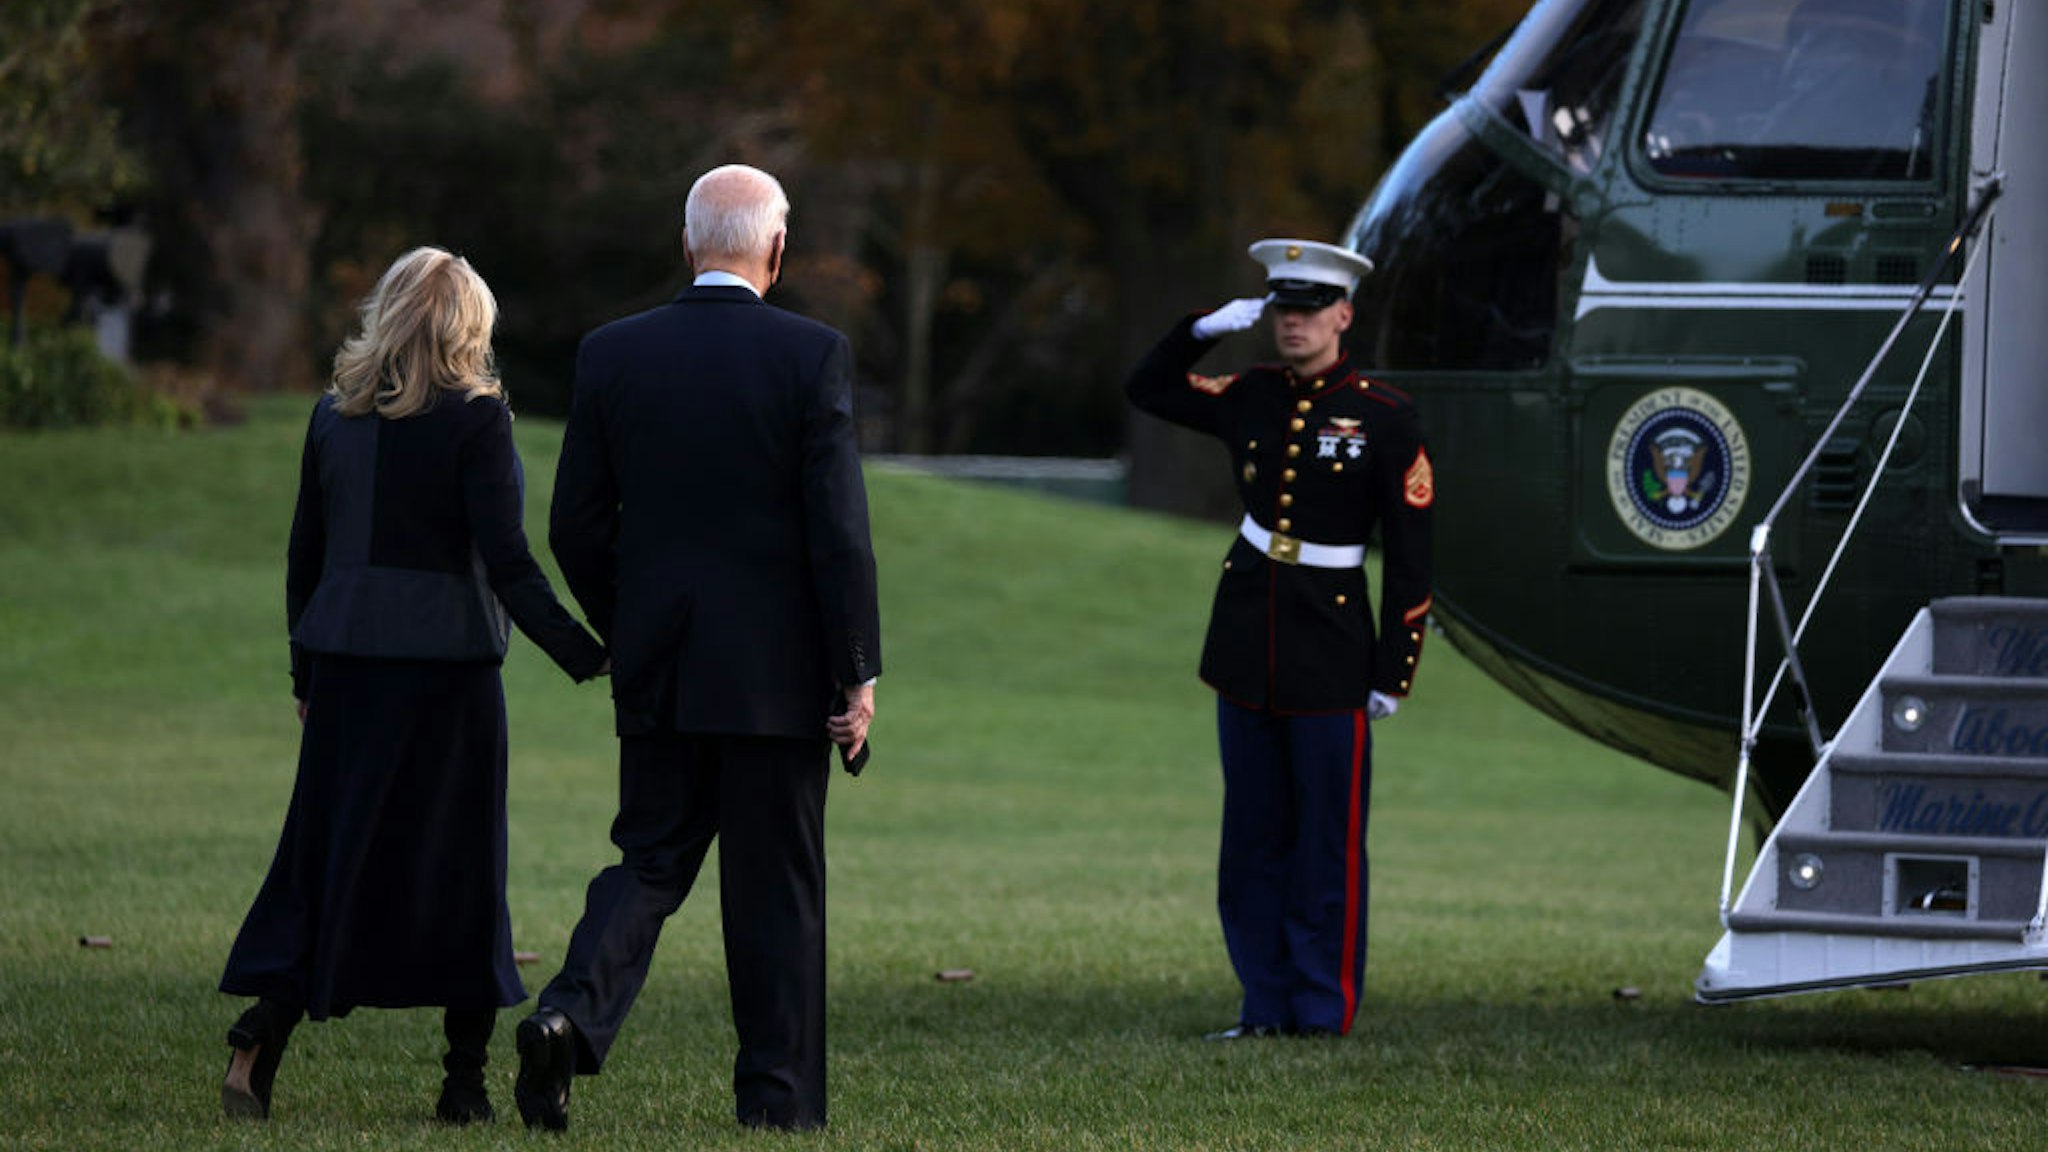 WASHINGTON, DC - NOVEMBER 22: U.S. President Joe Biden and first lady Jill Biden walk toward the Marine One for a South Lawn departure from the White House November 22, 2021 in Washington, DC. President Biden and the first lady are traveling to Fort Bragg, North Carolina, to celebrate Friendsgiving with service members and military families. (Photo by Alex Wong/Getty Images)